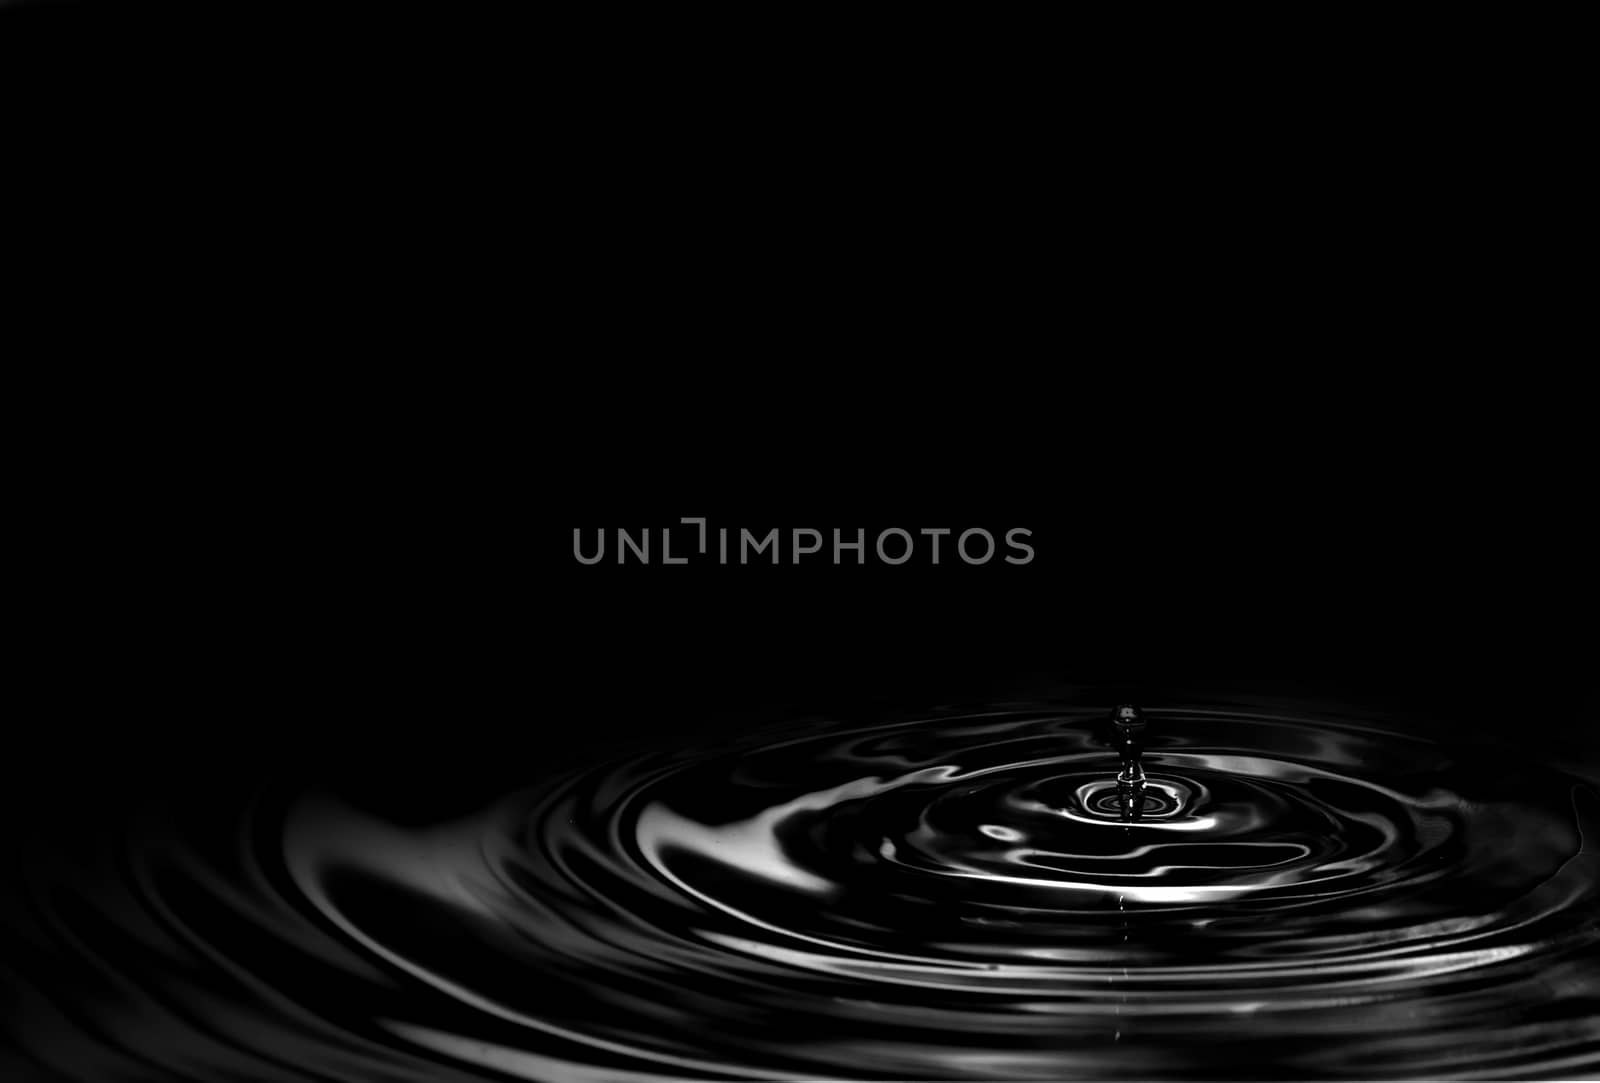 abstract black oil background